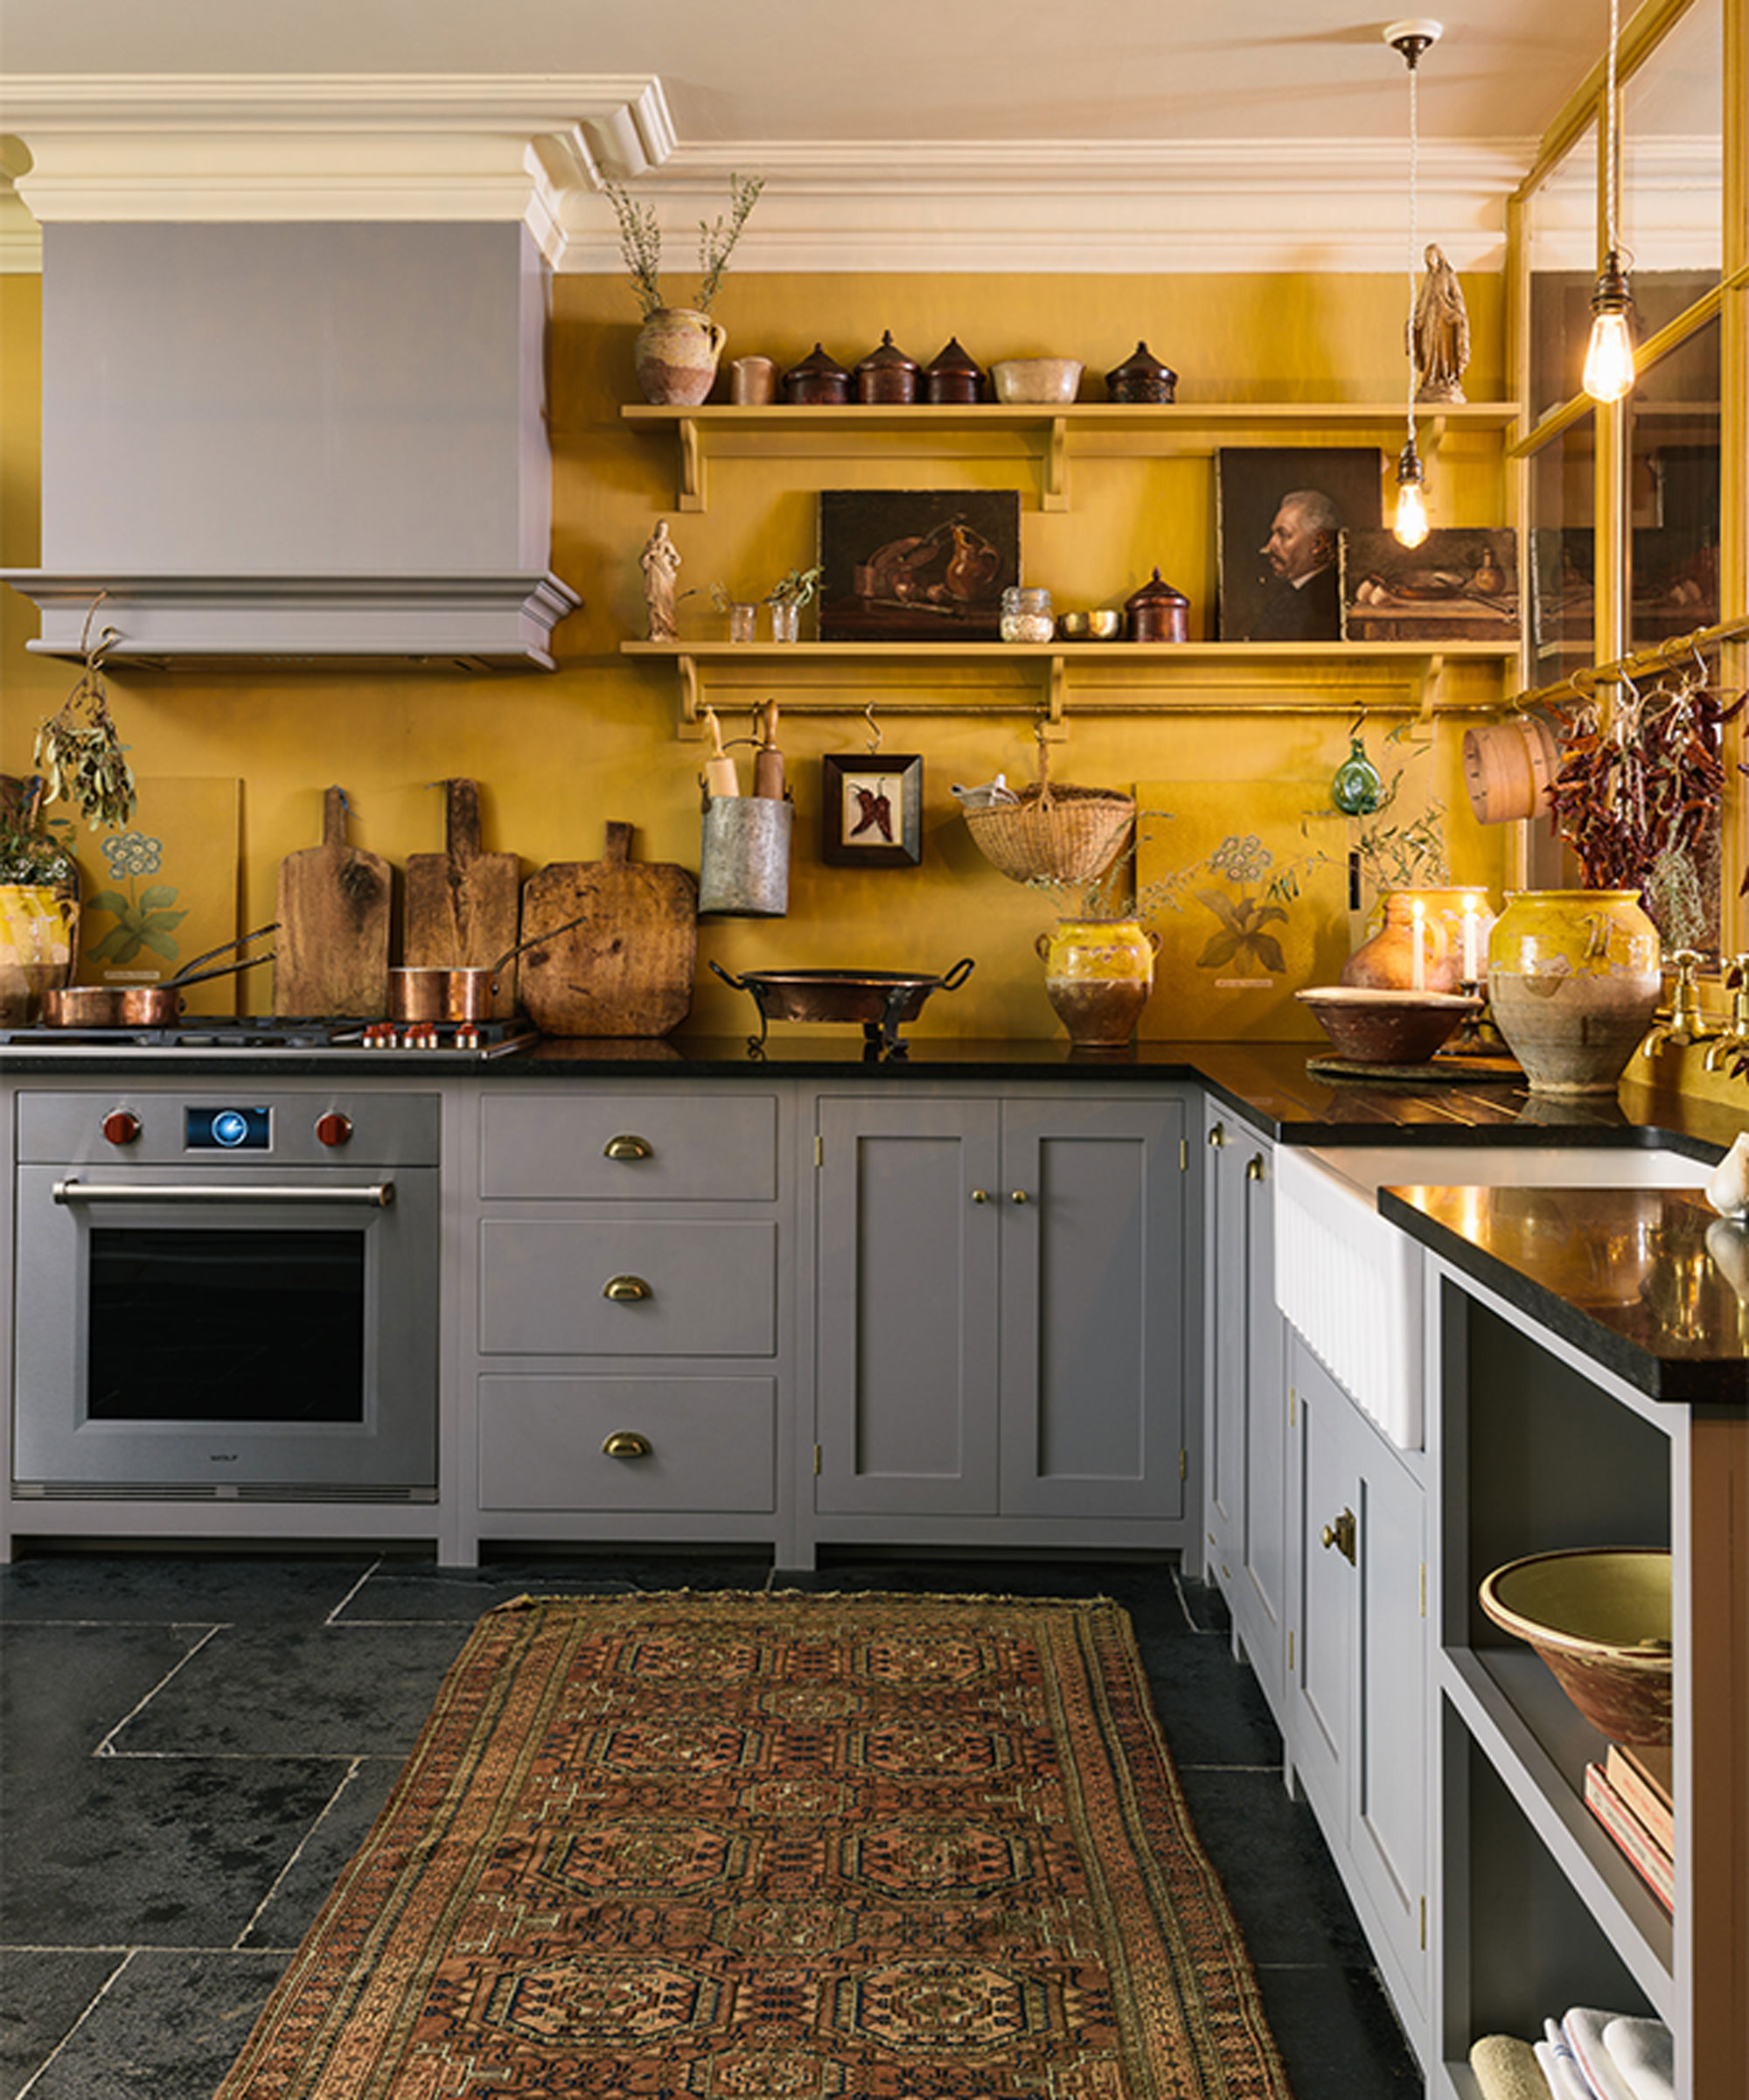 7 timeless kitchen cabinet colors for an endlessly classic look